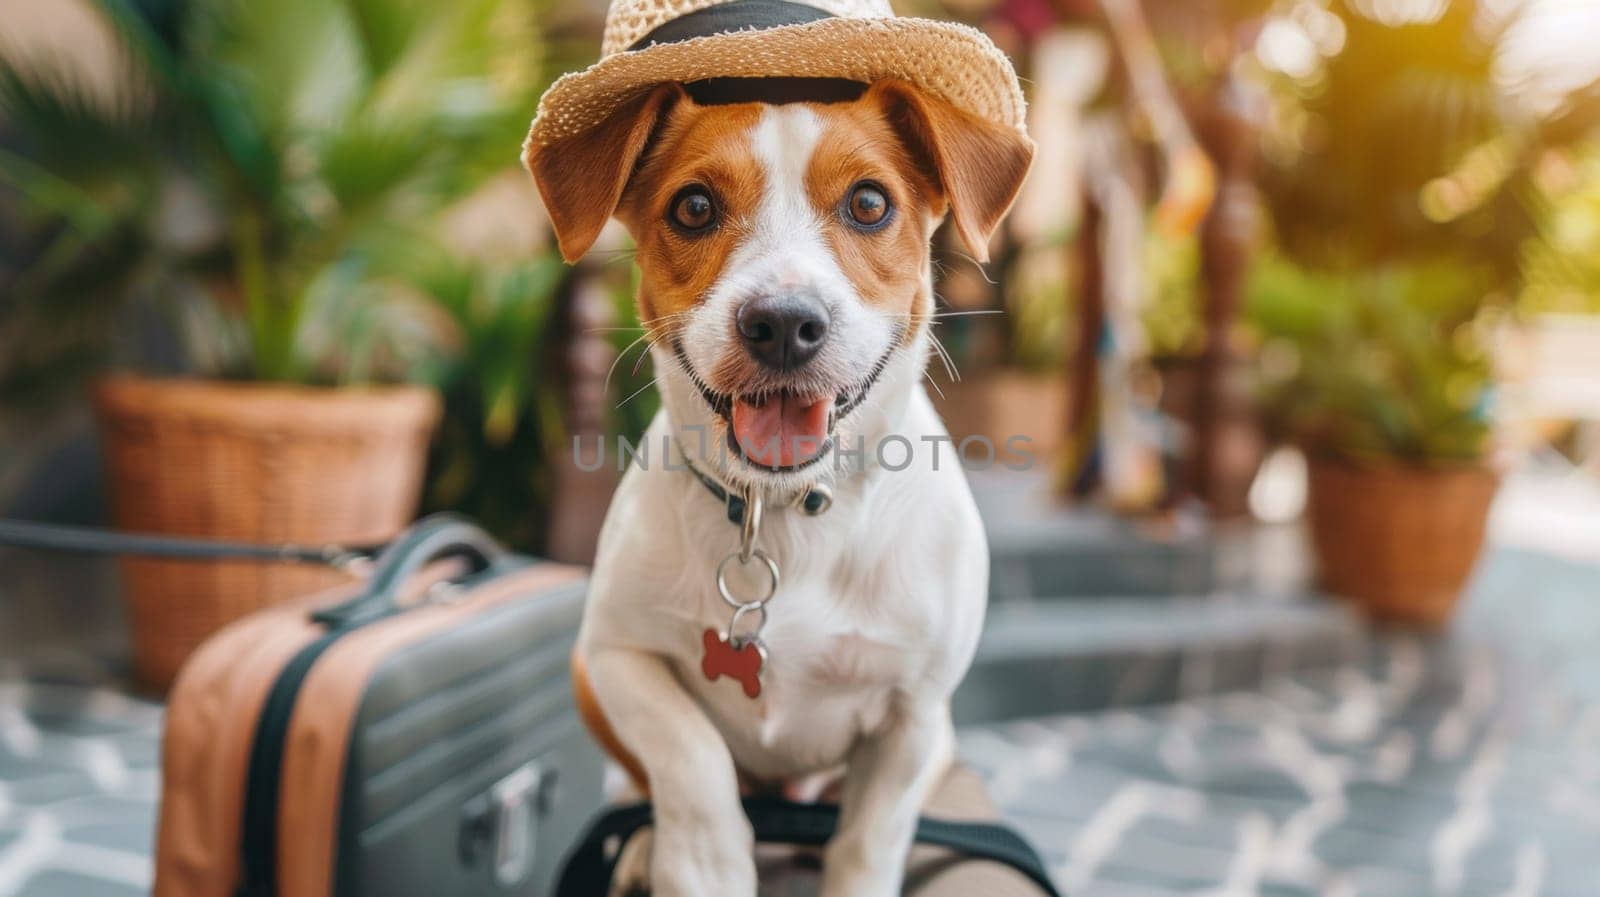 A dog wearing a hat sitting on top of luggage, AI by starush